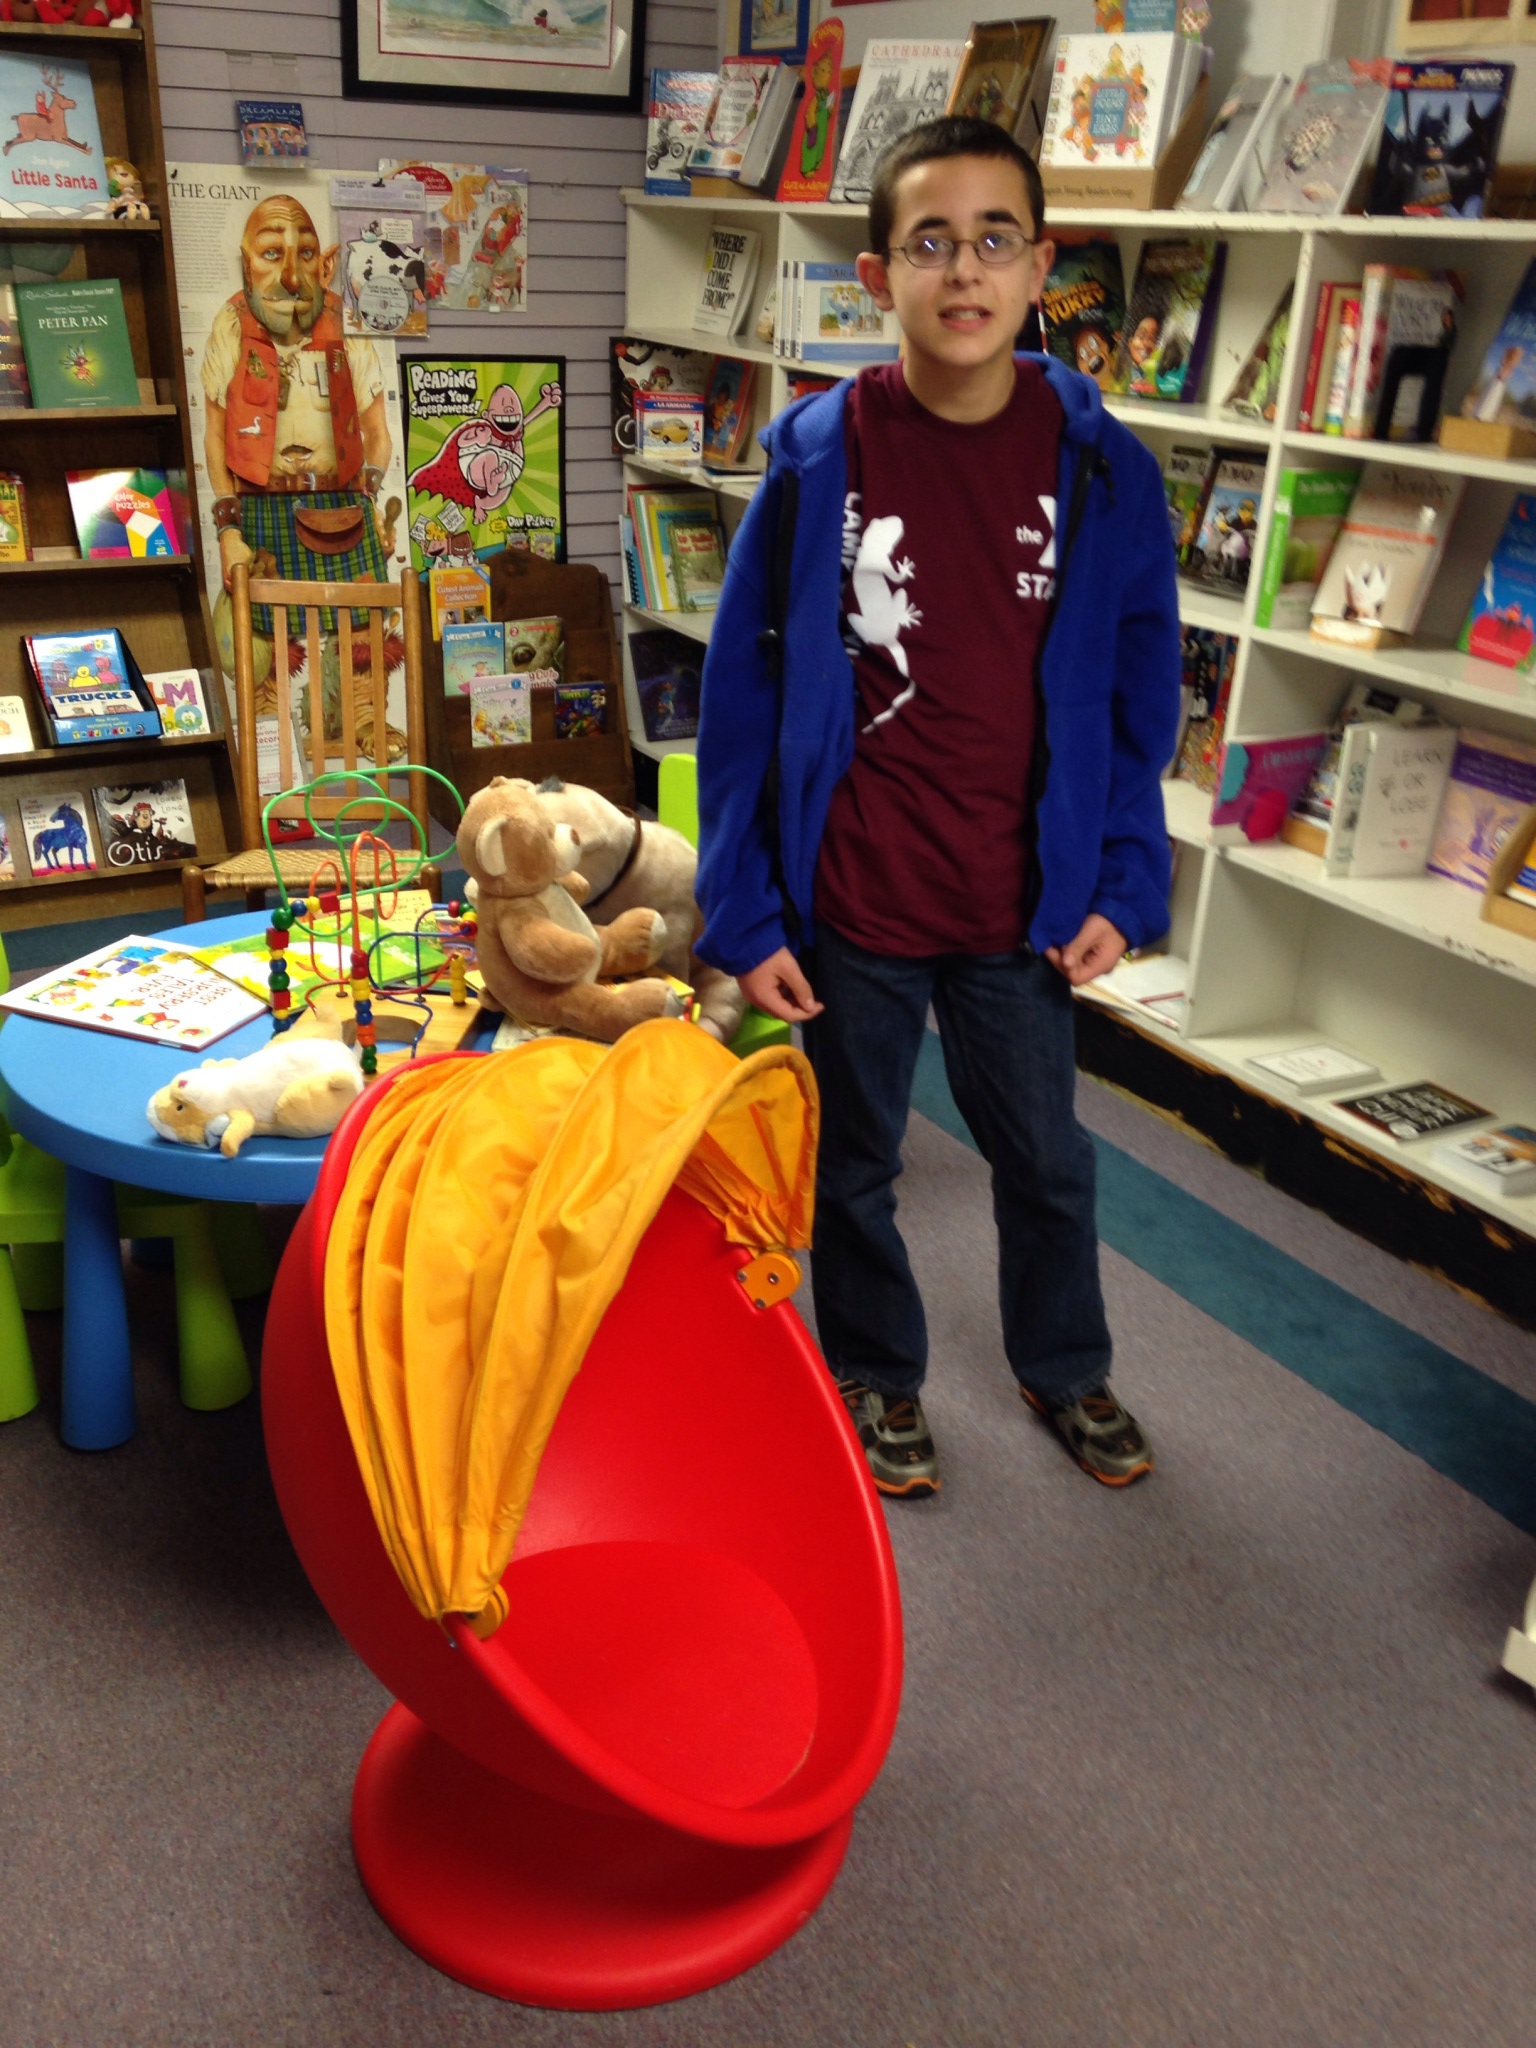 A boy stands in a classroom library. An egg style chair is shown. 